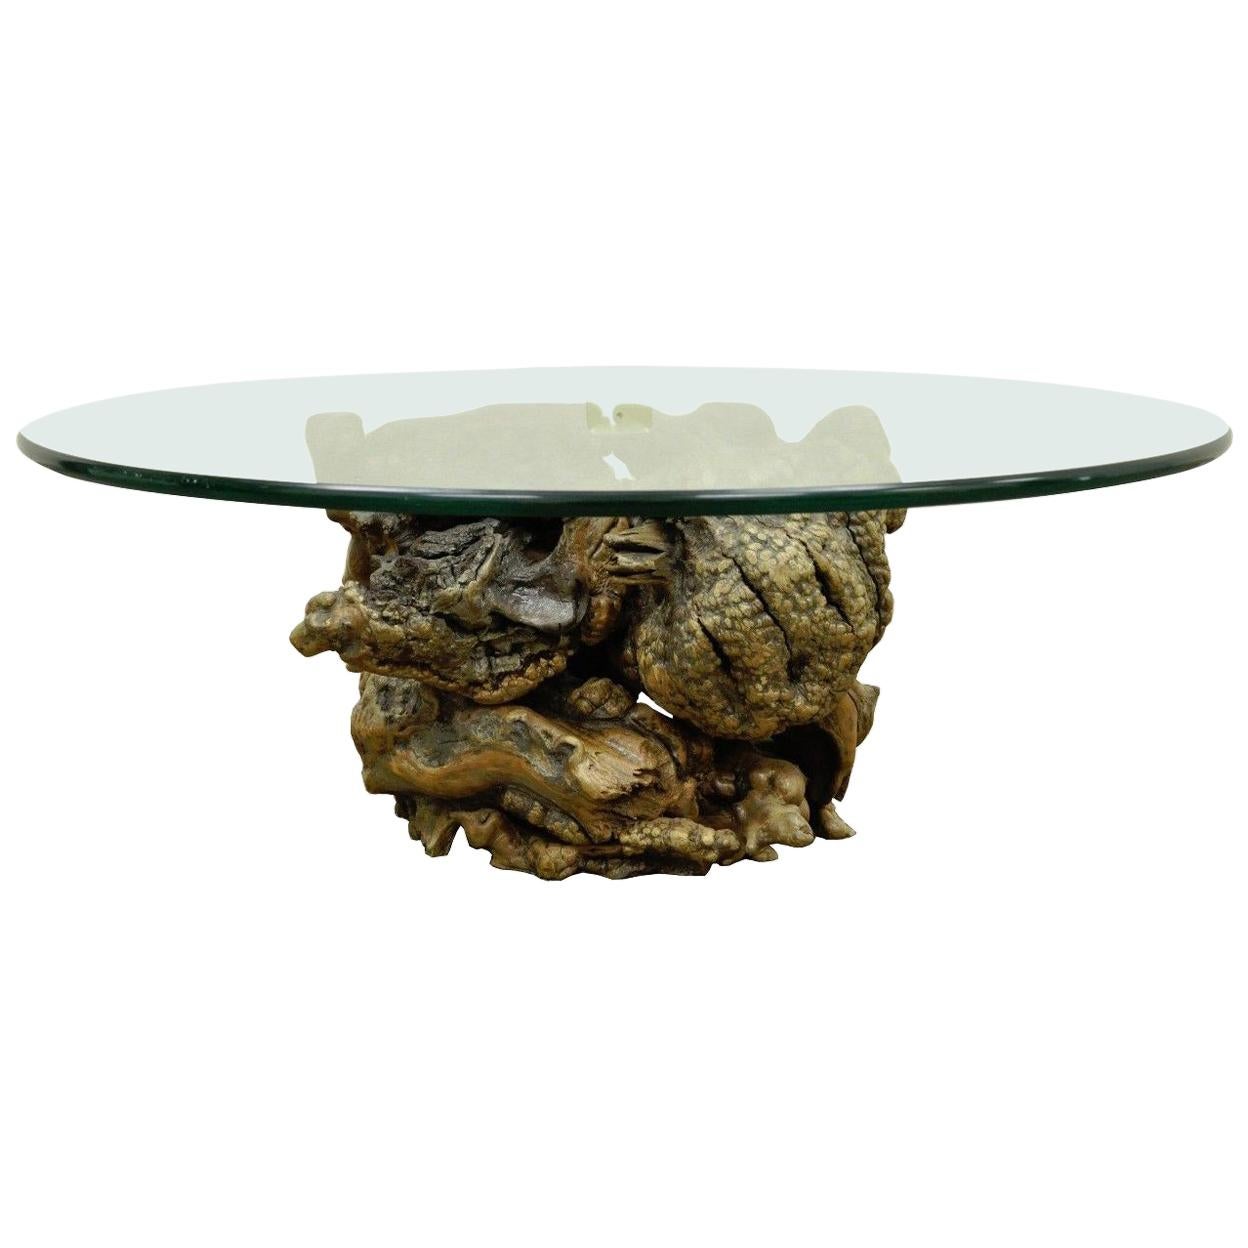 Vintage Mid-Century Modern Live Edge Drift Wood Glass Top Burl Wood Coffee Table For Sale